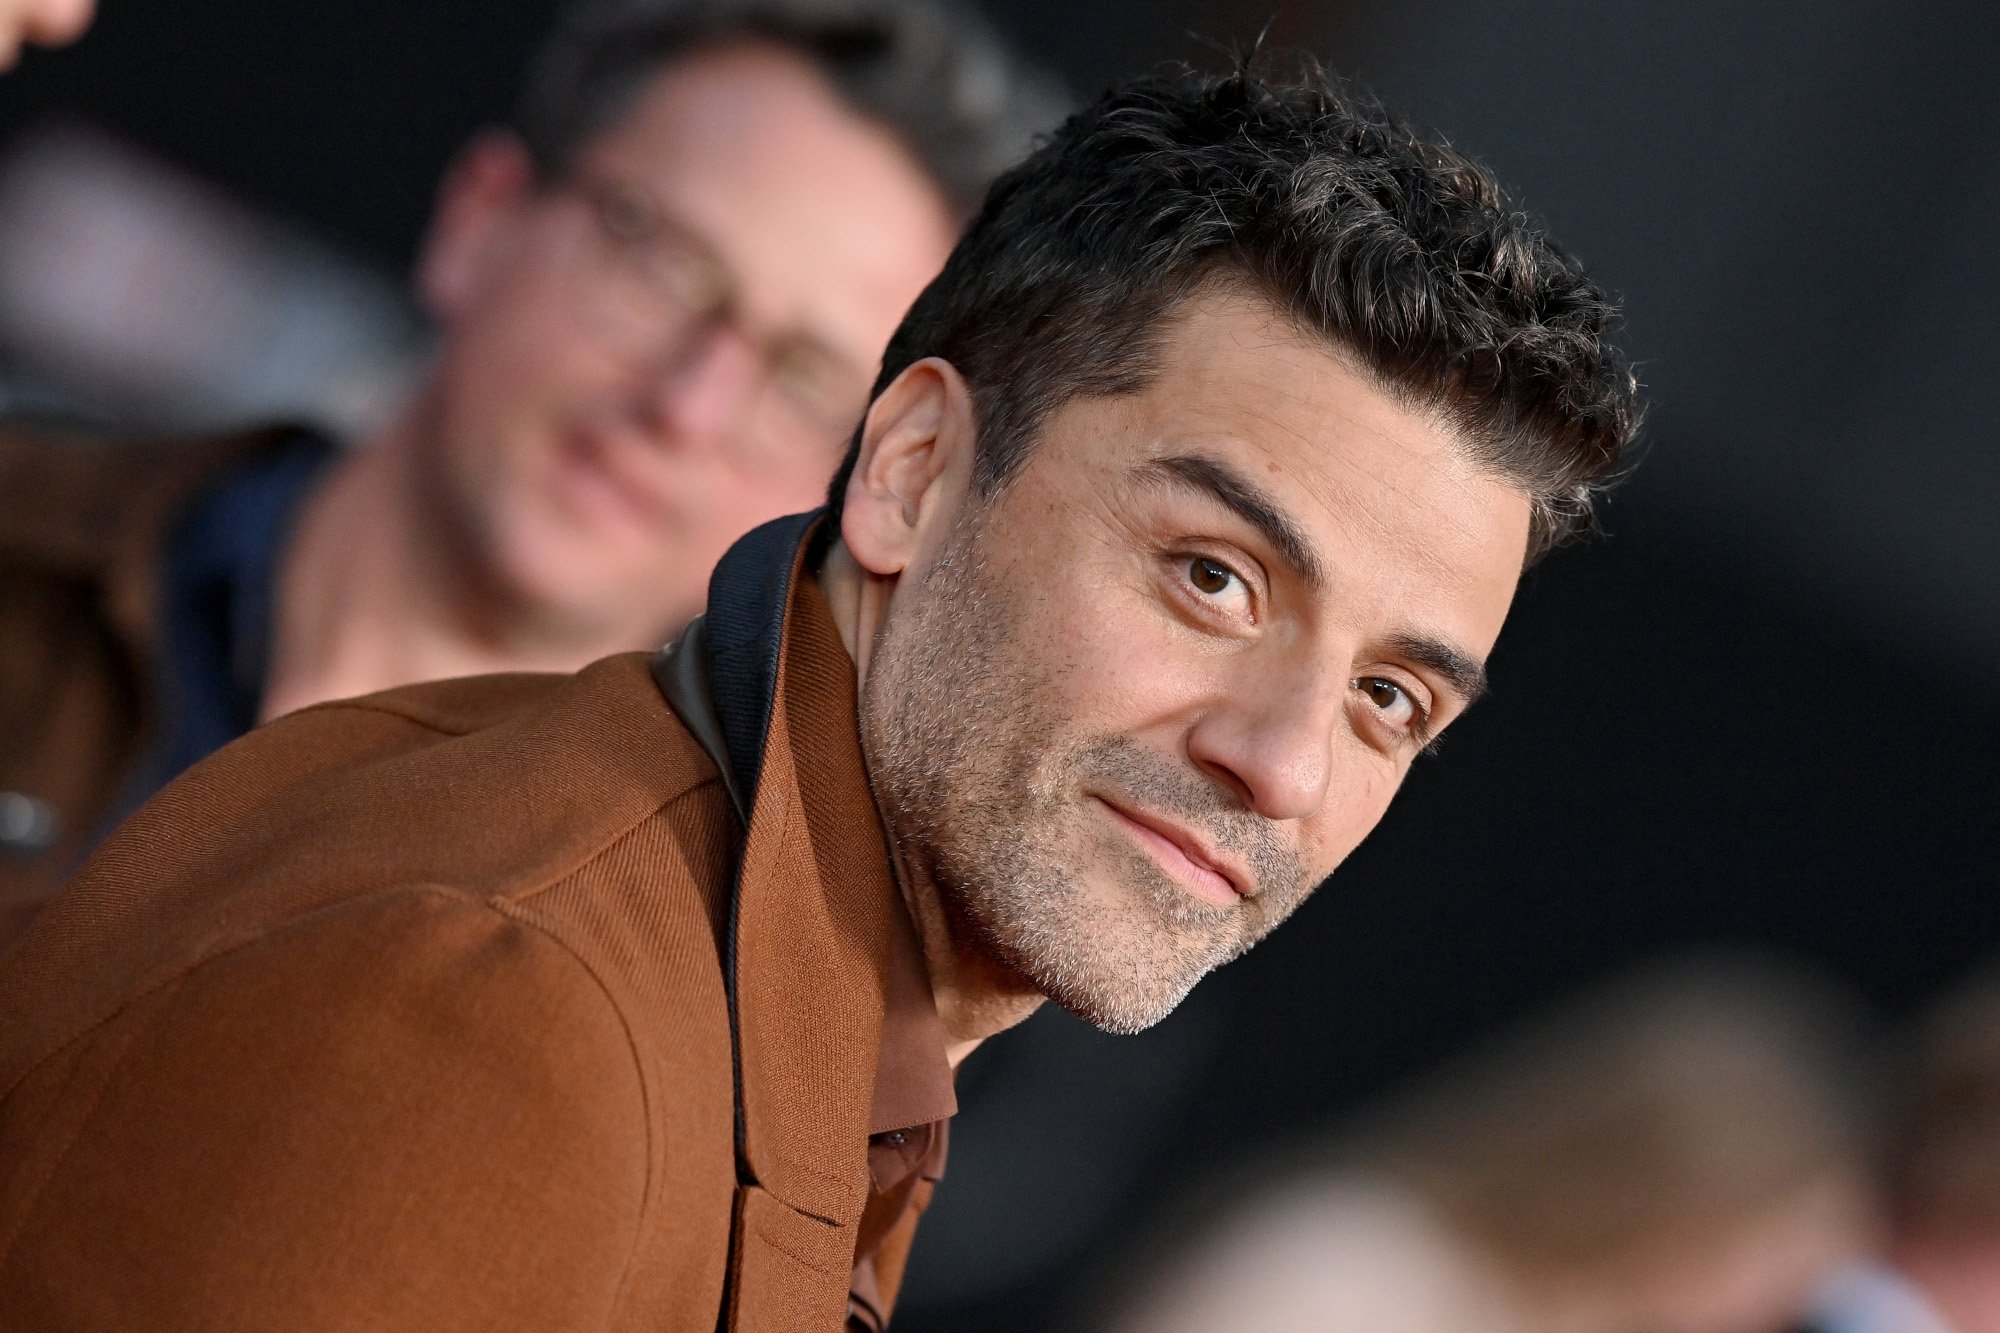 Oscar Isaac at the premiere for Marvel's 'Moon Knight.' He's wearing a light brown jacket and smiling.